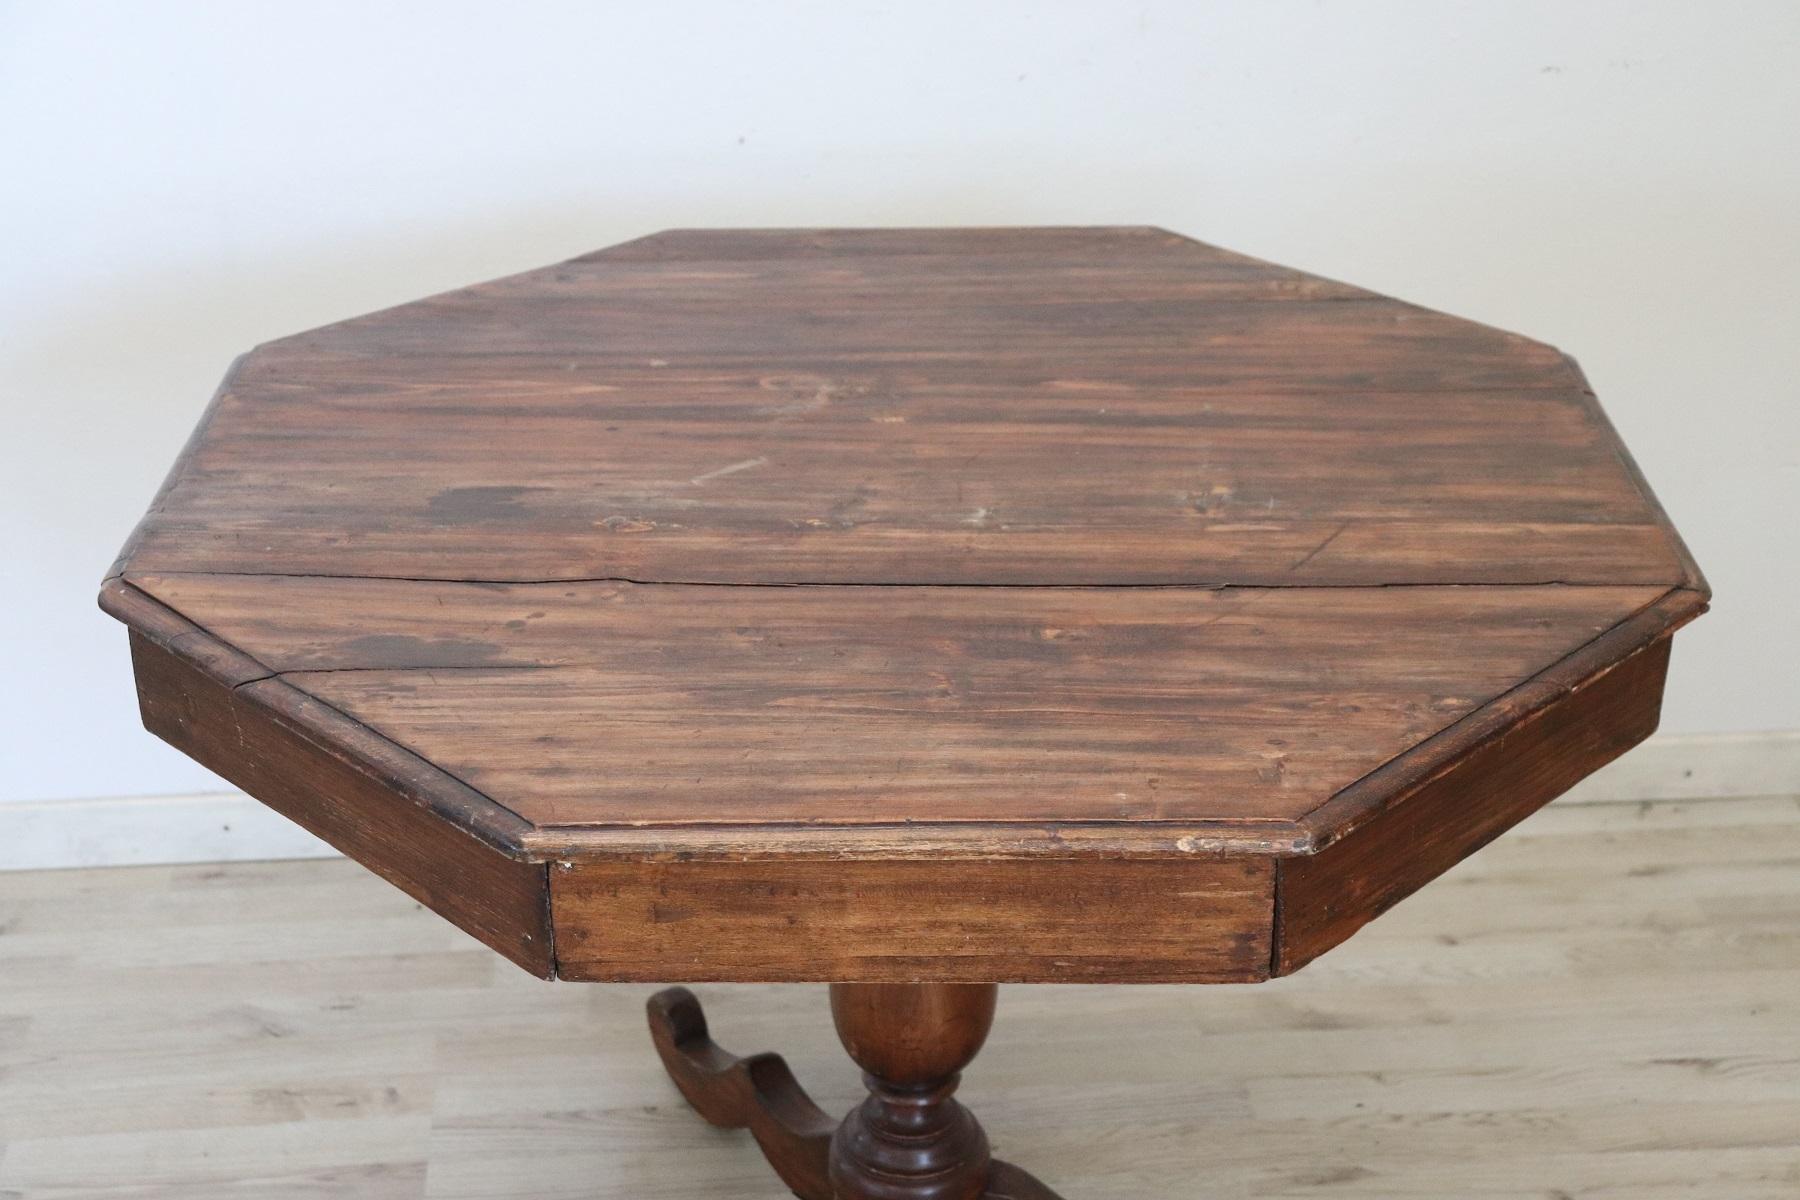 Beautiful antique hexagonal center table, 1850s in poplar wood. The plan presents glass top. The central leg is finely turned.
The antique table have been used in need of restoration as you can see from the wear defects in photos. We can provide in